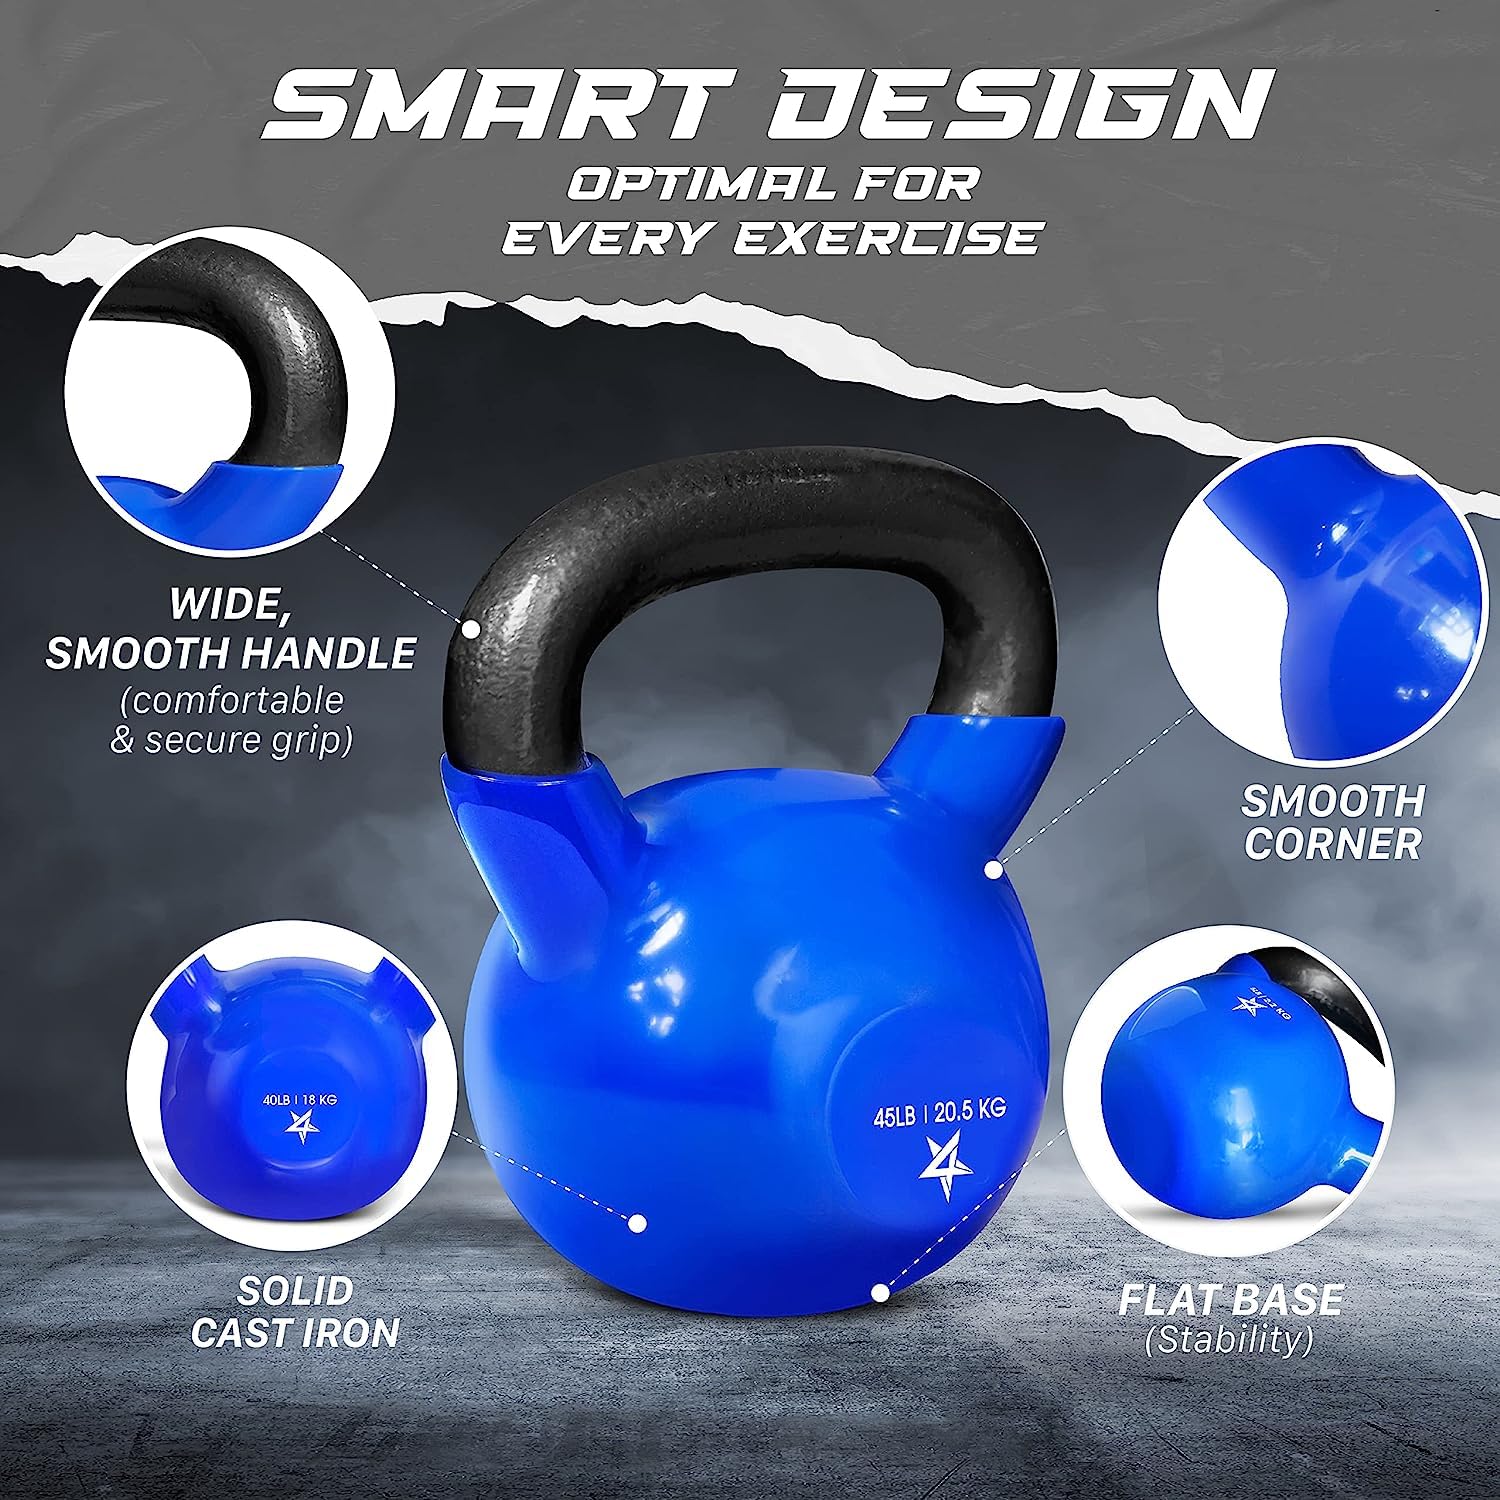 Yes4All 45 lb Kettlebell Vinyl coated cast Iron - great for Dumbbell Weights Exercises, Hand and Heavy Weights for gym, Fitness,